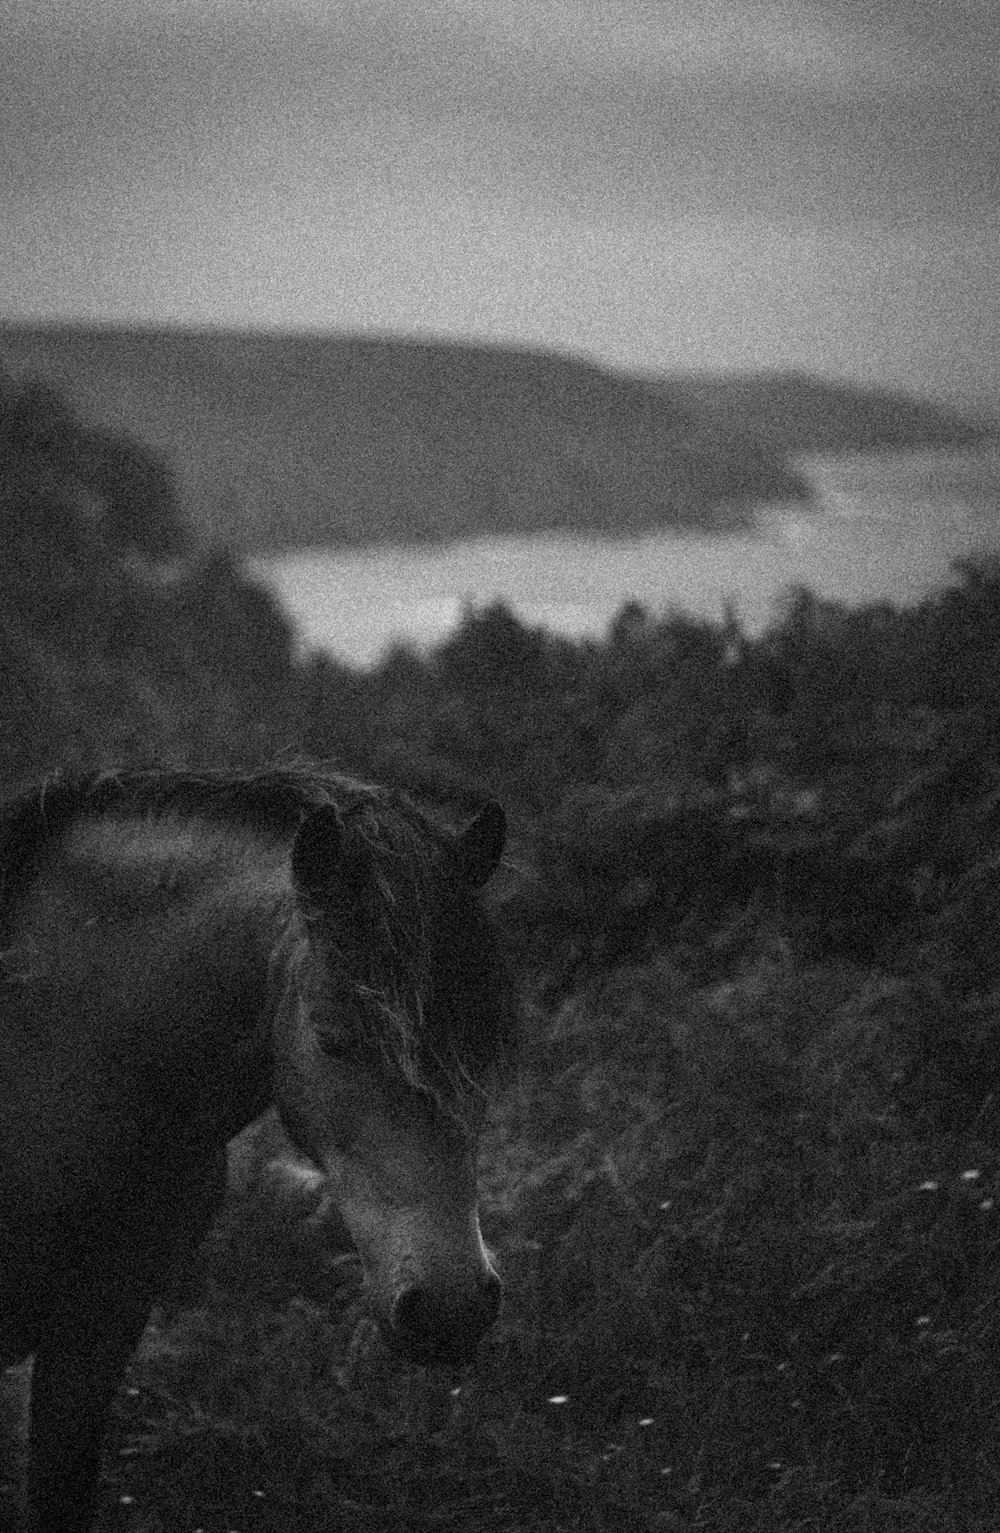 grayscale photo of horse on grass field